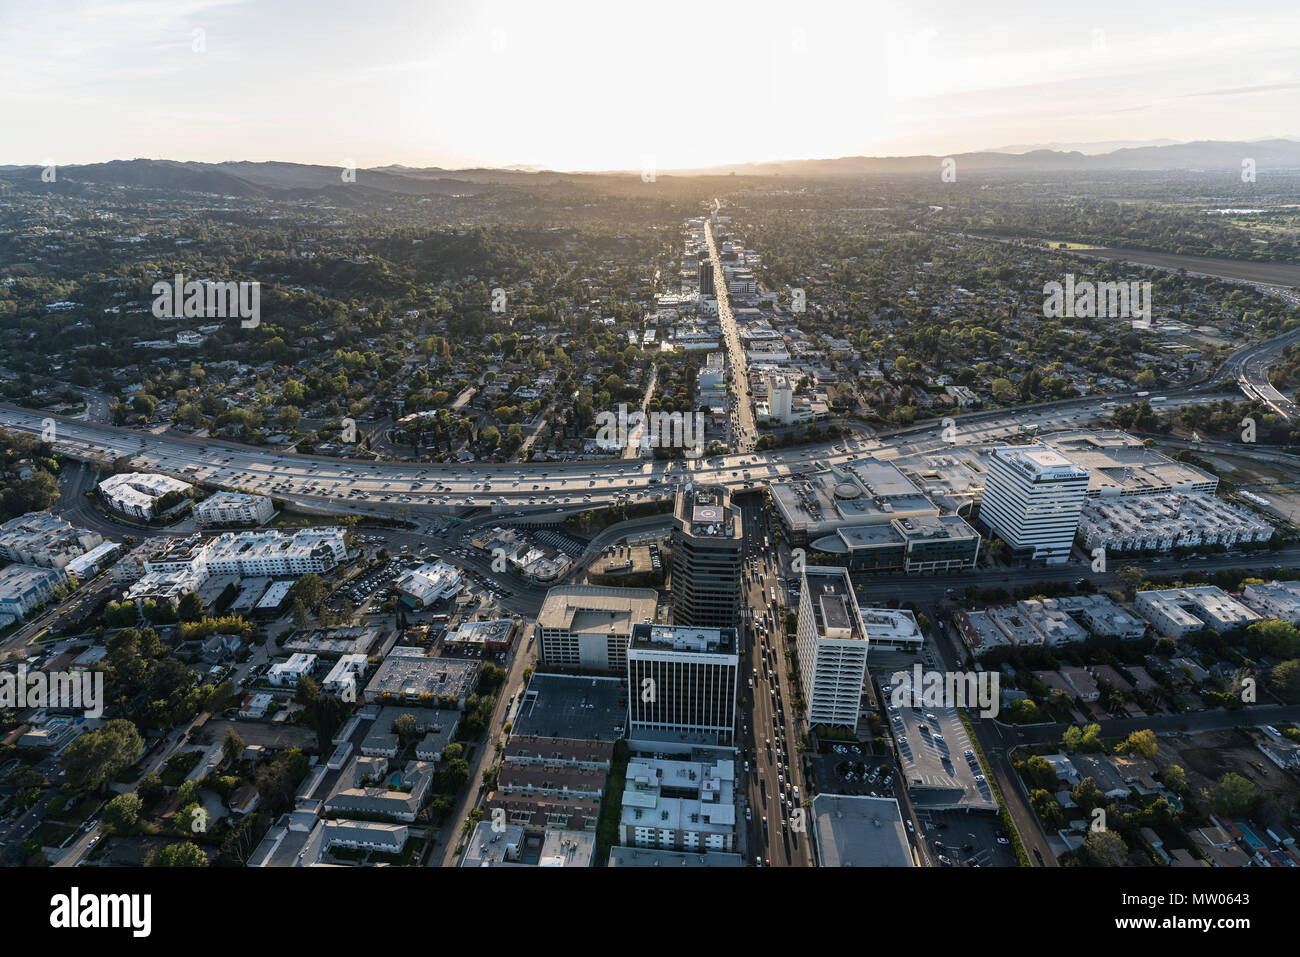 Los Angeles, California, USA - April 18, 2018:  Aerial view of Ventura Bl and the San Diego 405 Freeway in the Sherman Oaks area of the San Fernando V Stock Photo